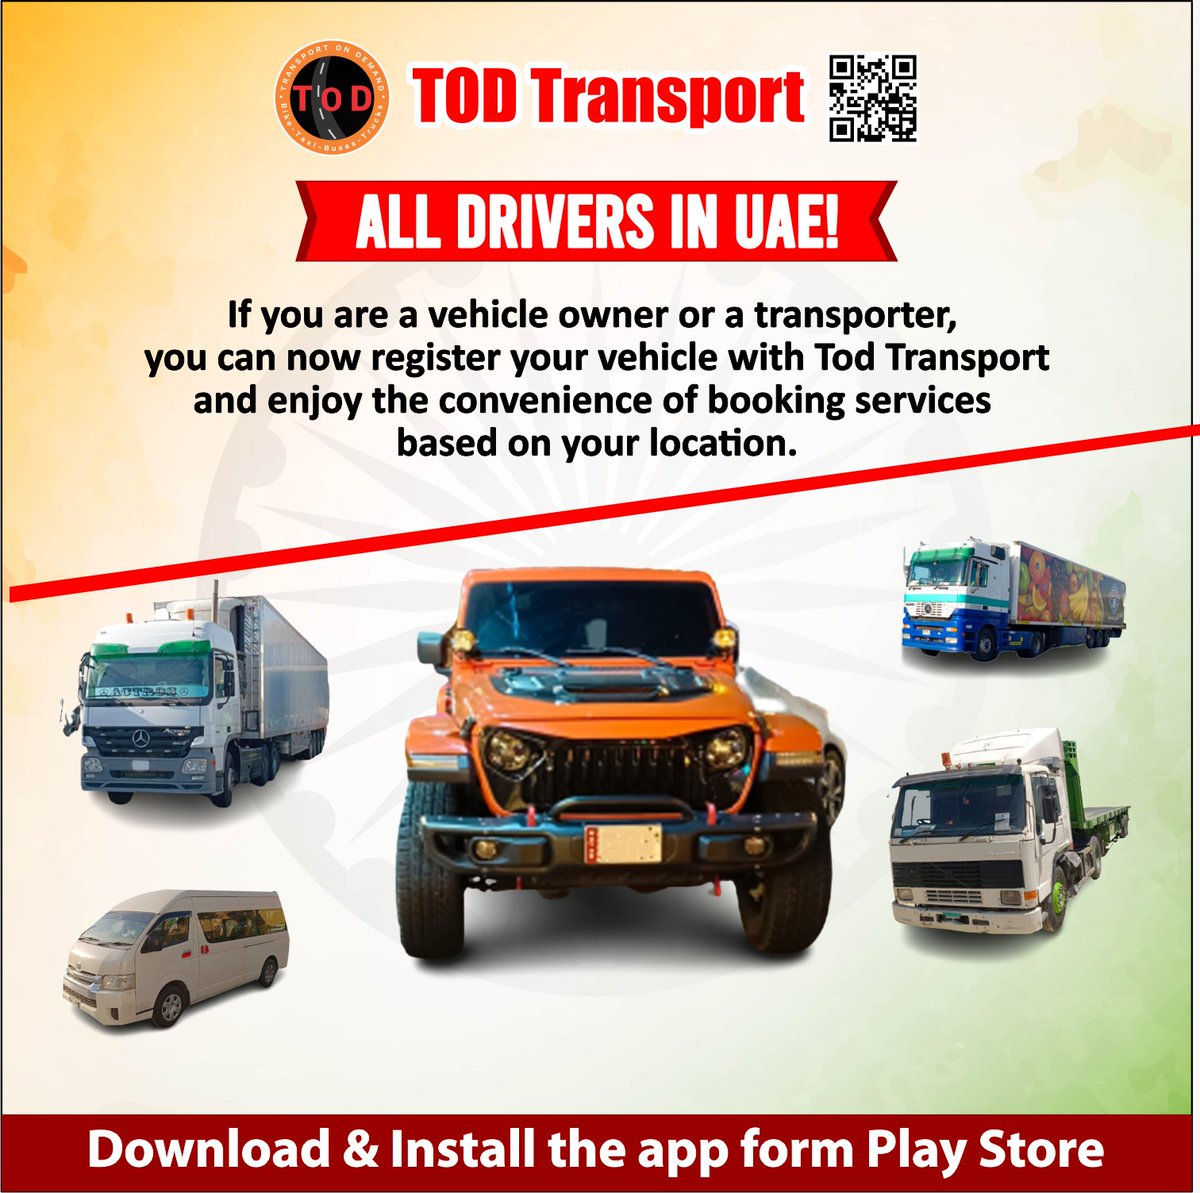 🛵🚗 Ready to transform your commute? Register your vehicle with TOD Transport UAE and unlock 6 MONTHS of FREE bookings from registration date. Experience seamless travel with just a tap. Join us today! #TODTransportUAE #EffortlessJourneys #SmartBooking #ConvenienceAtItsBest